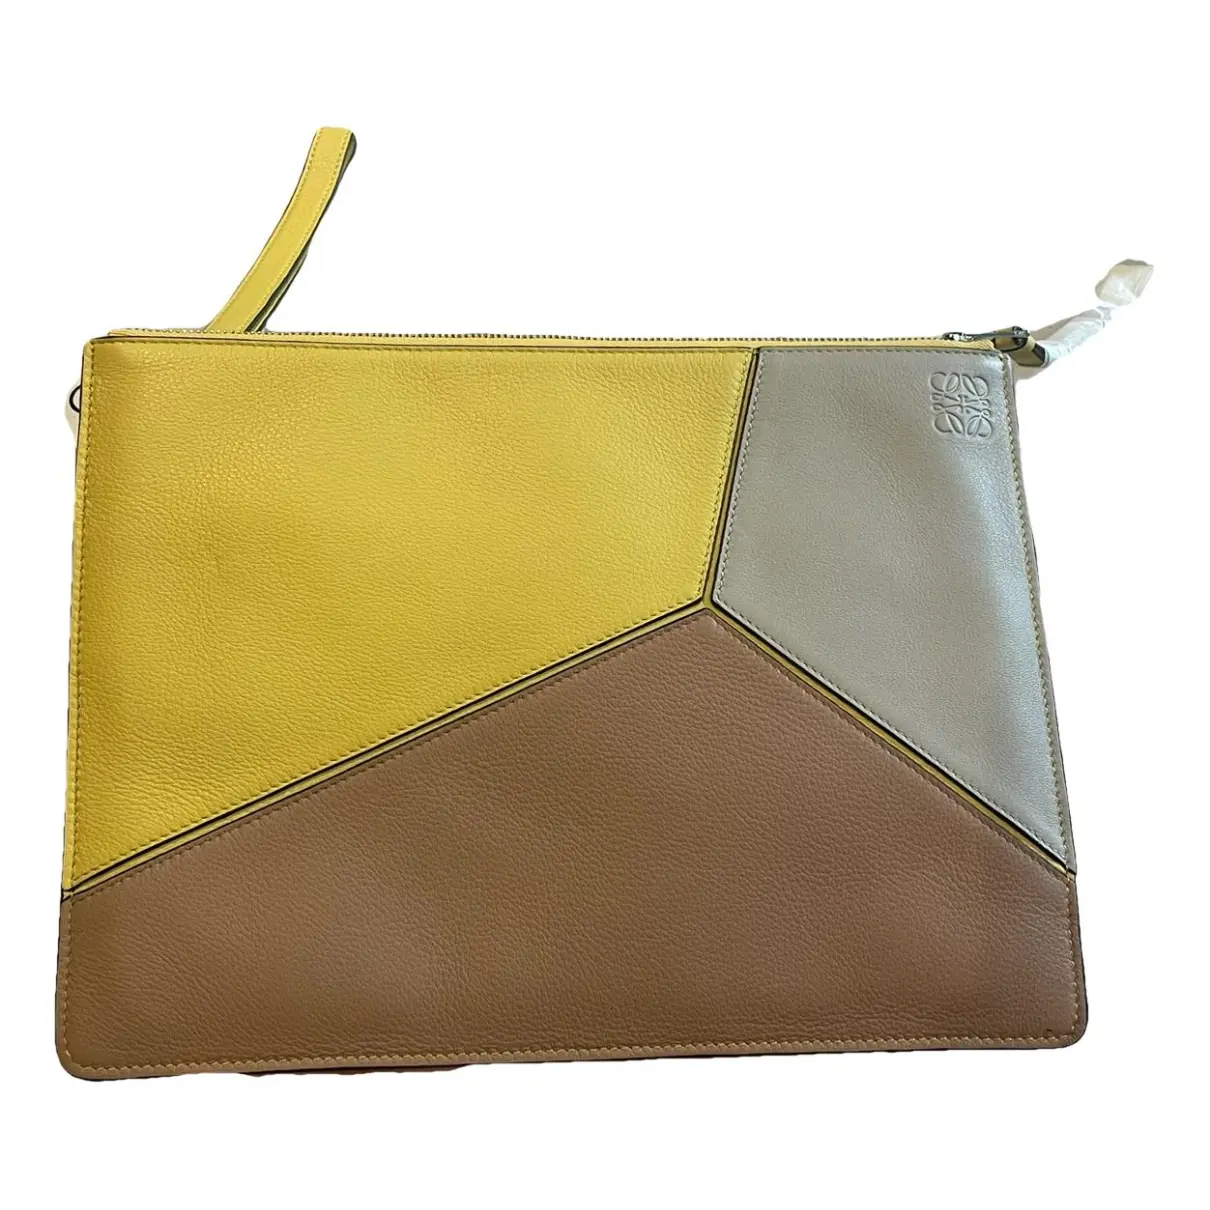 Puzzle leather clutch bag